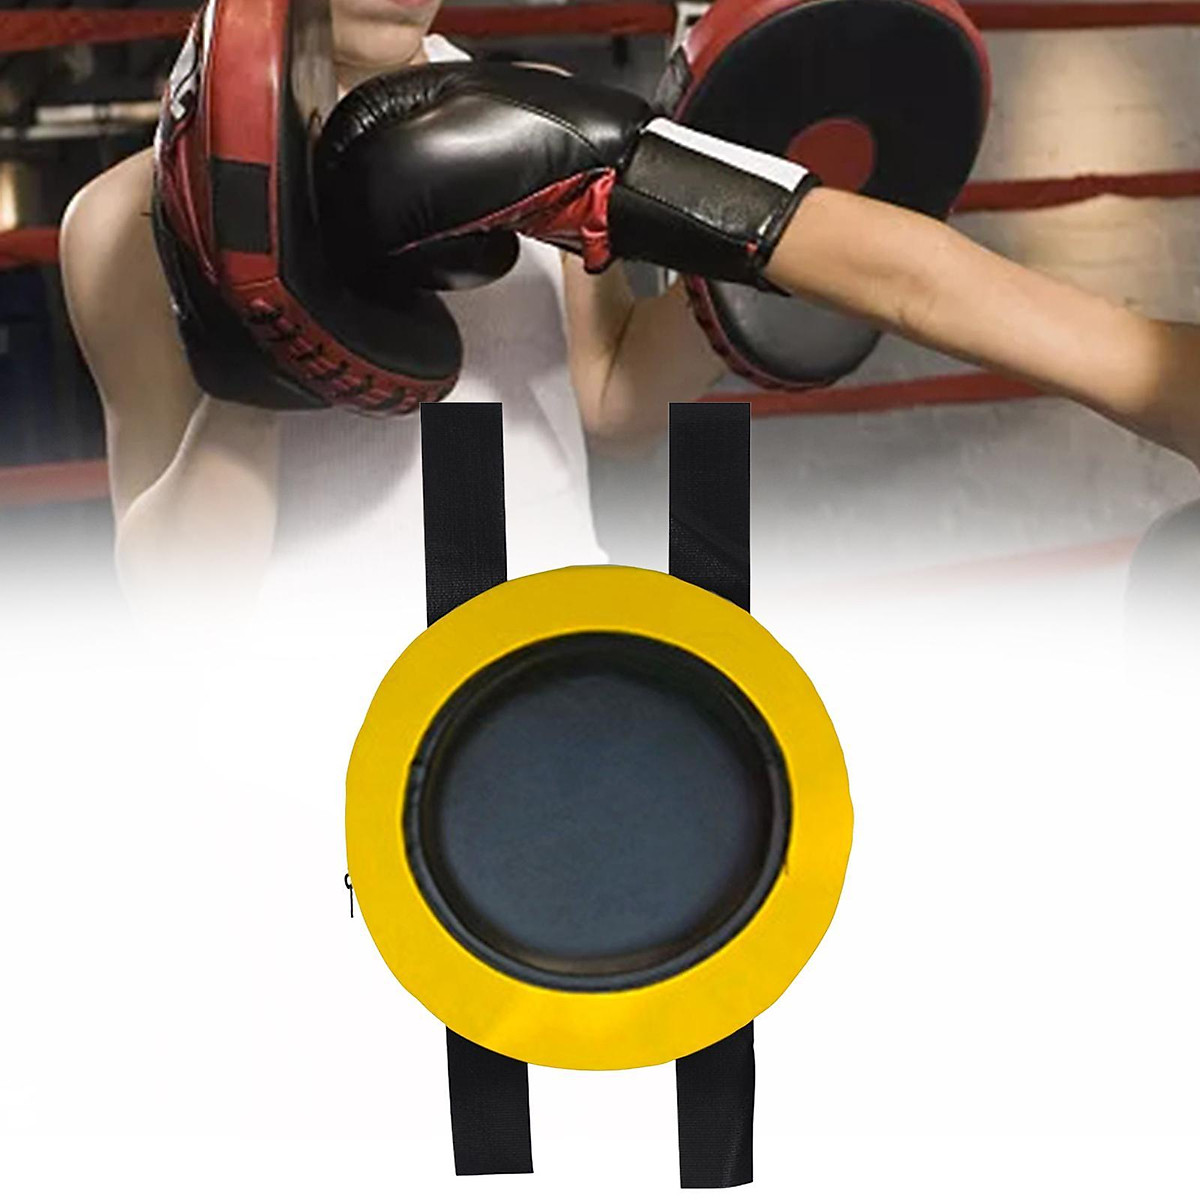 Strong Wall Mount Punching Bag Bracket For AUD$ 99 - Sweatcentral.Com.Au–  Sweat Central